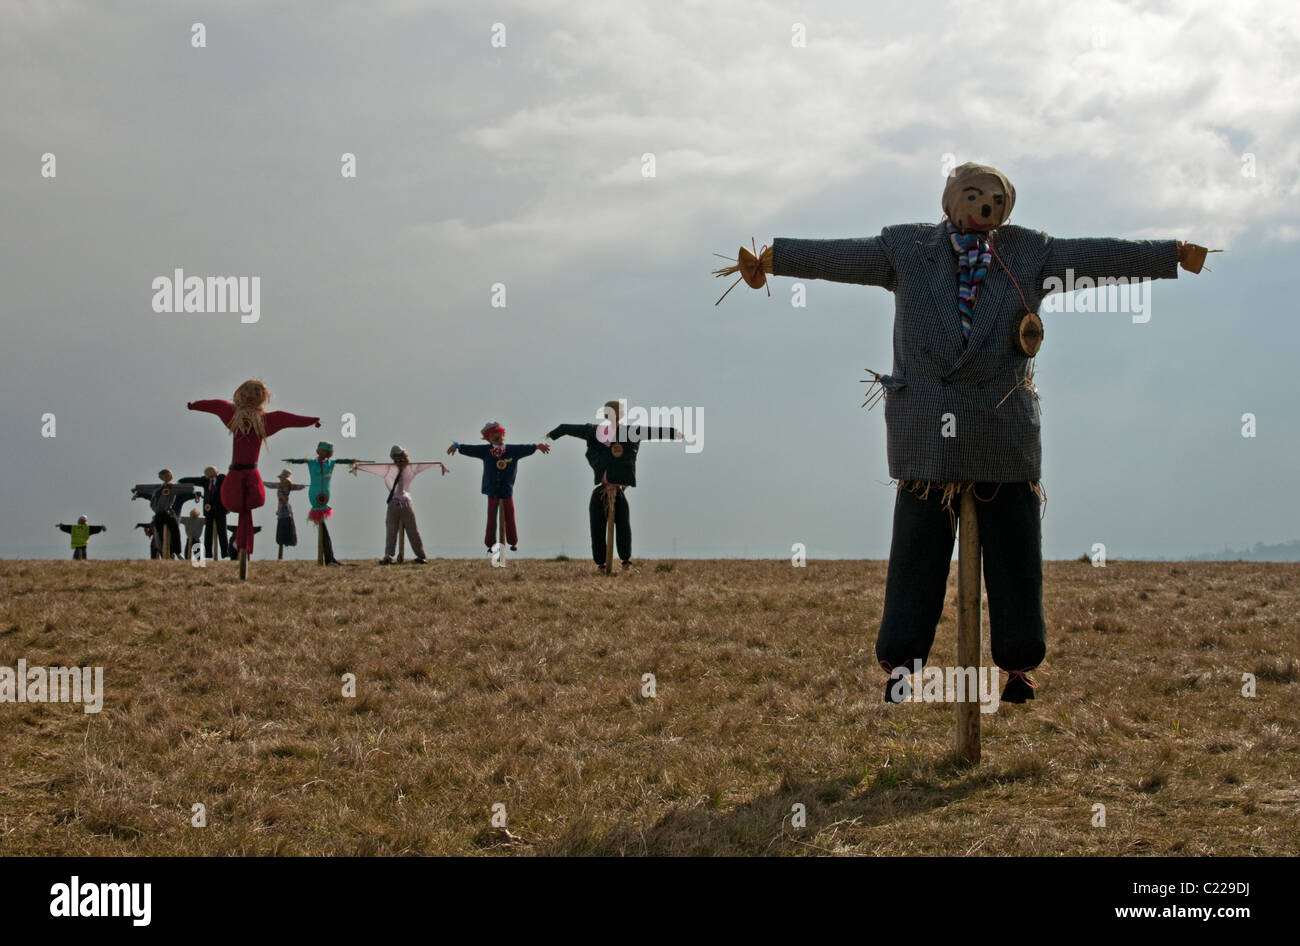 Field of multiple scarecrows. Stock Photo